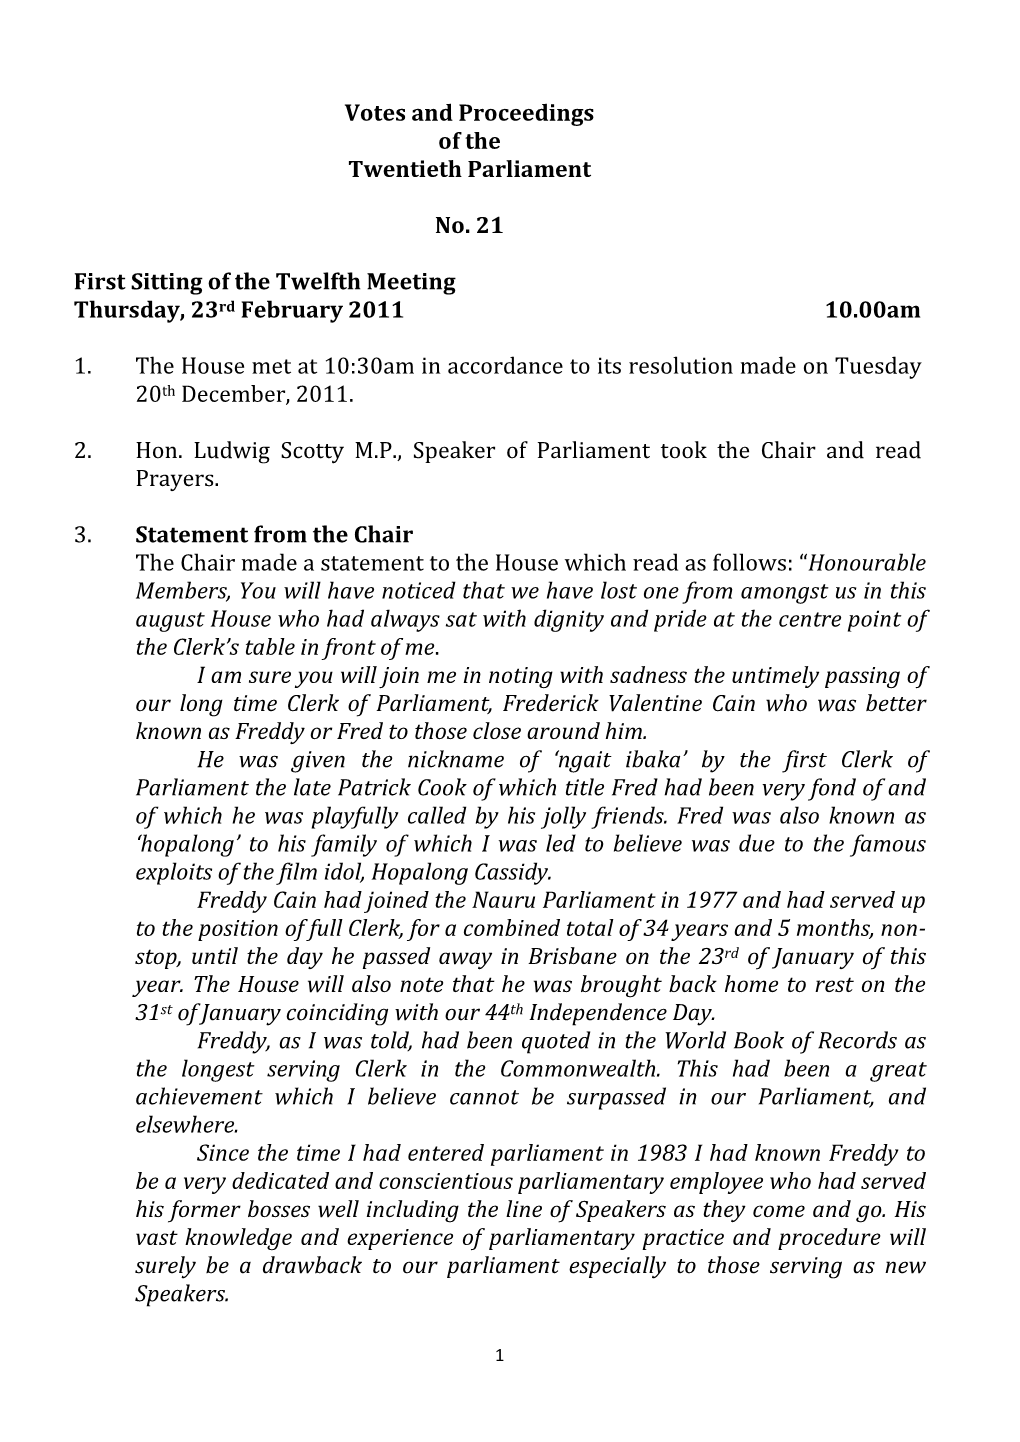 Votes and Proceedings of the Twentieth Parliament No. 21 First